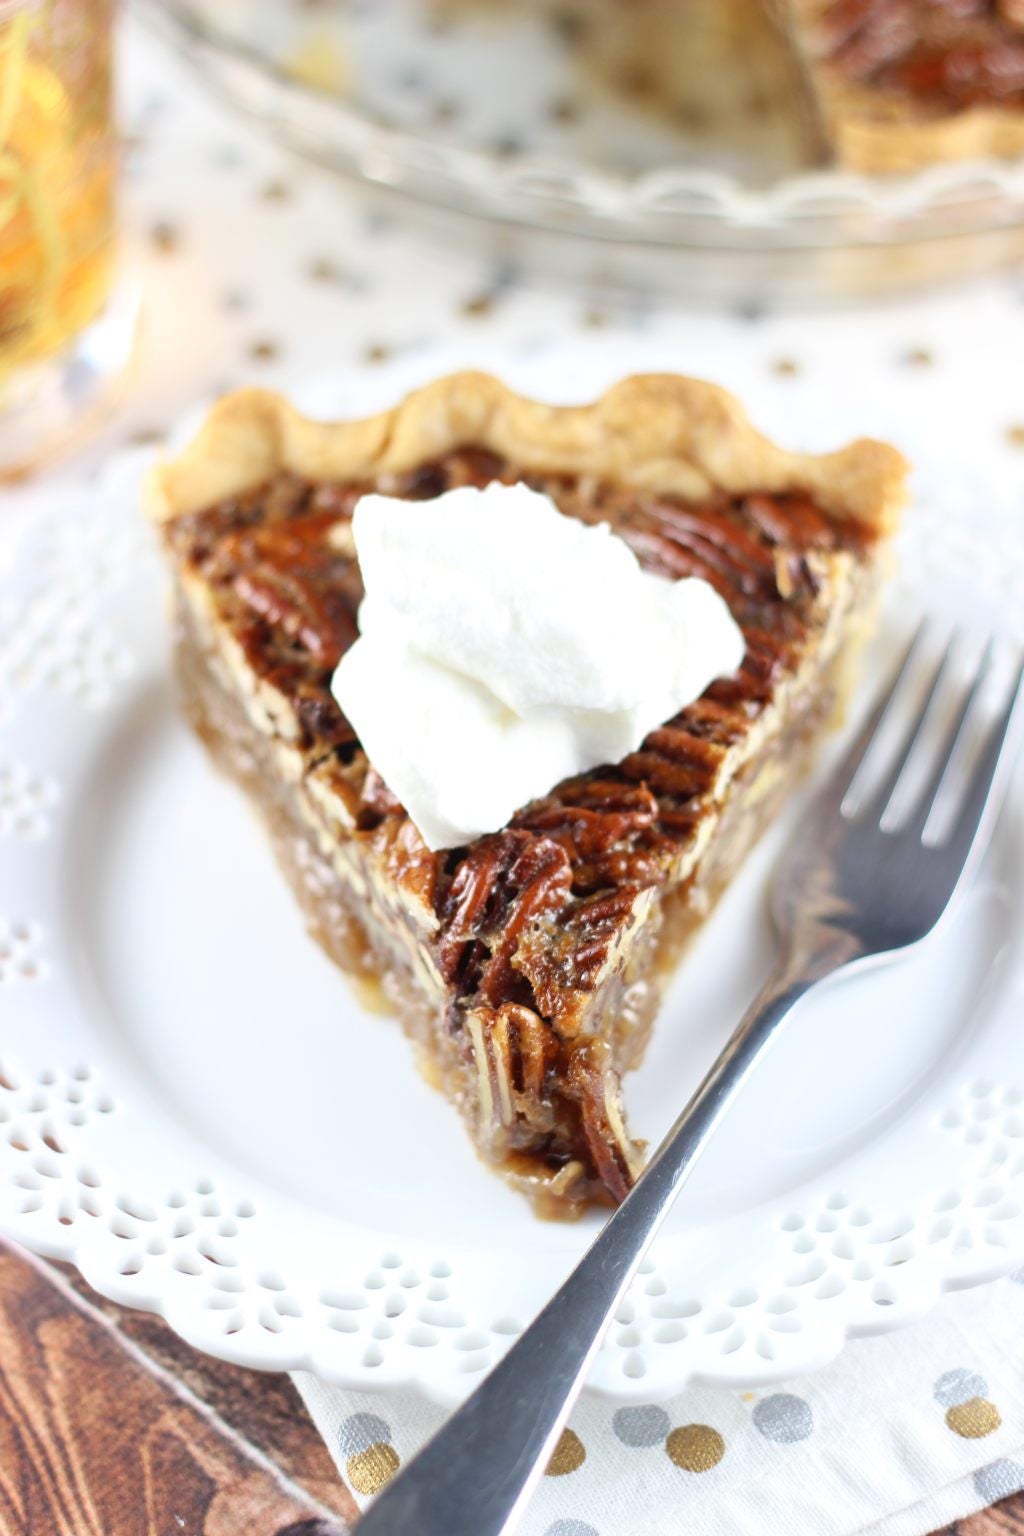 10 Delicious Pie Recipes To Master For The Holidays
